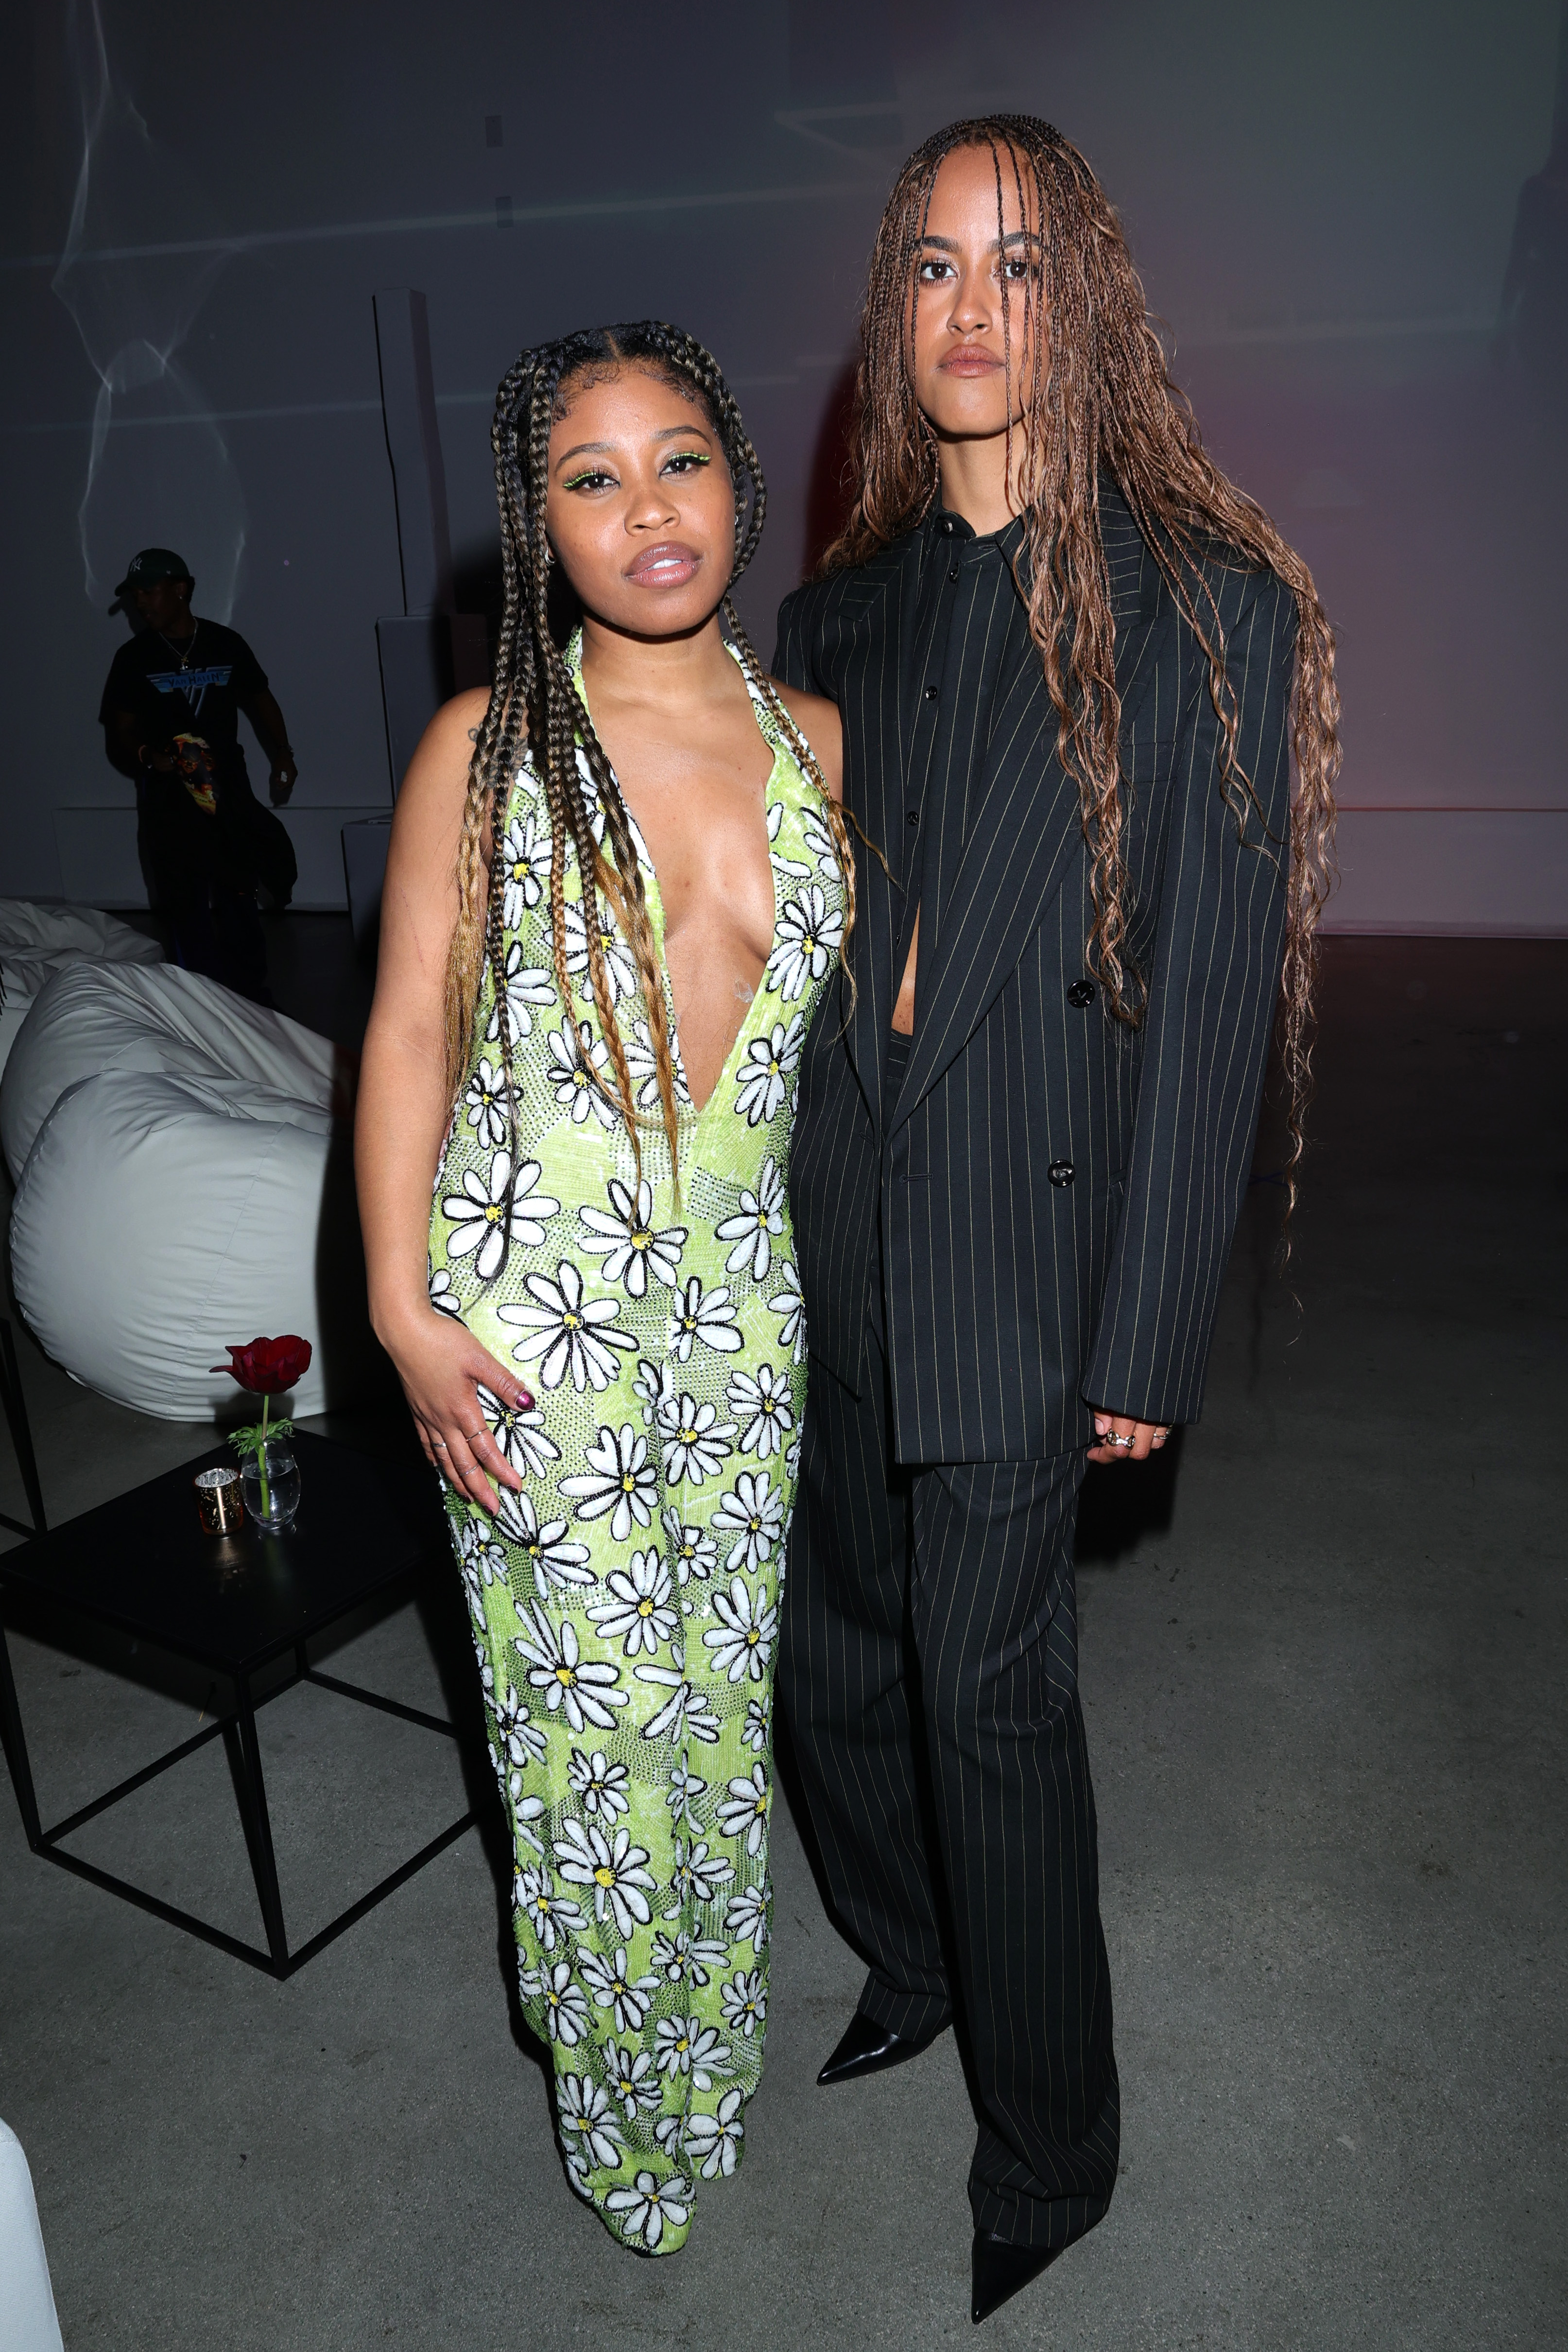 Dominique Fishback and Malia Obama at the red carpet premiere of "Swarm" in Los Angeles, California on March 14, 2023 | Source: Getty Images